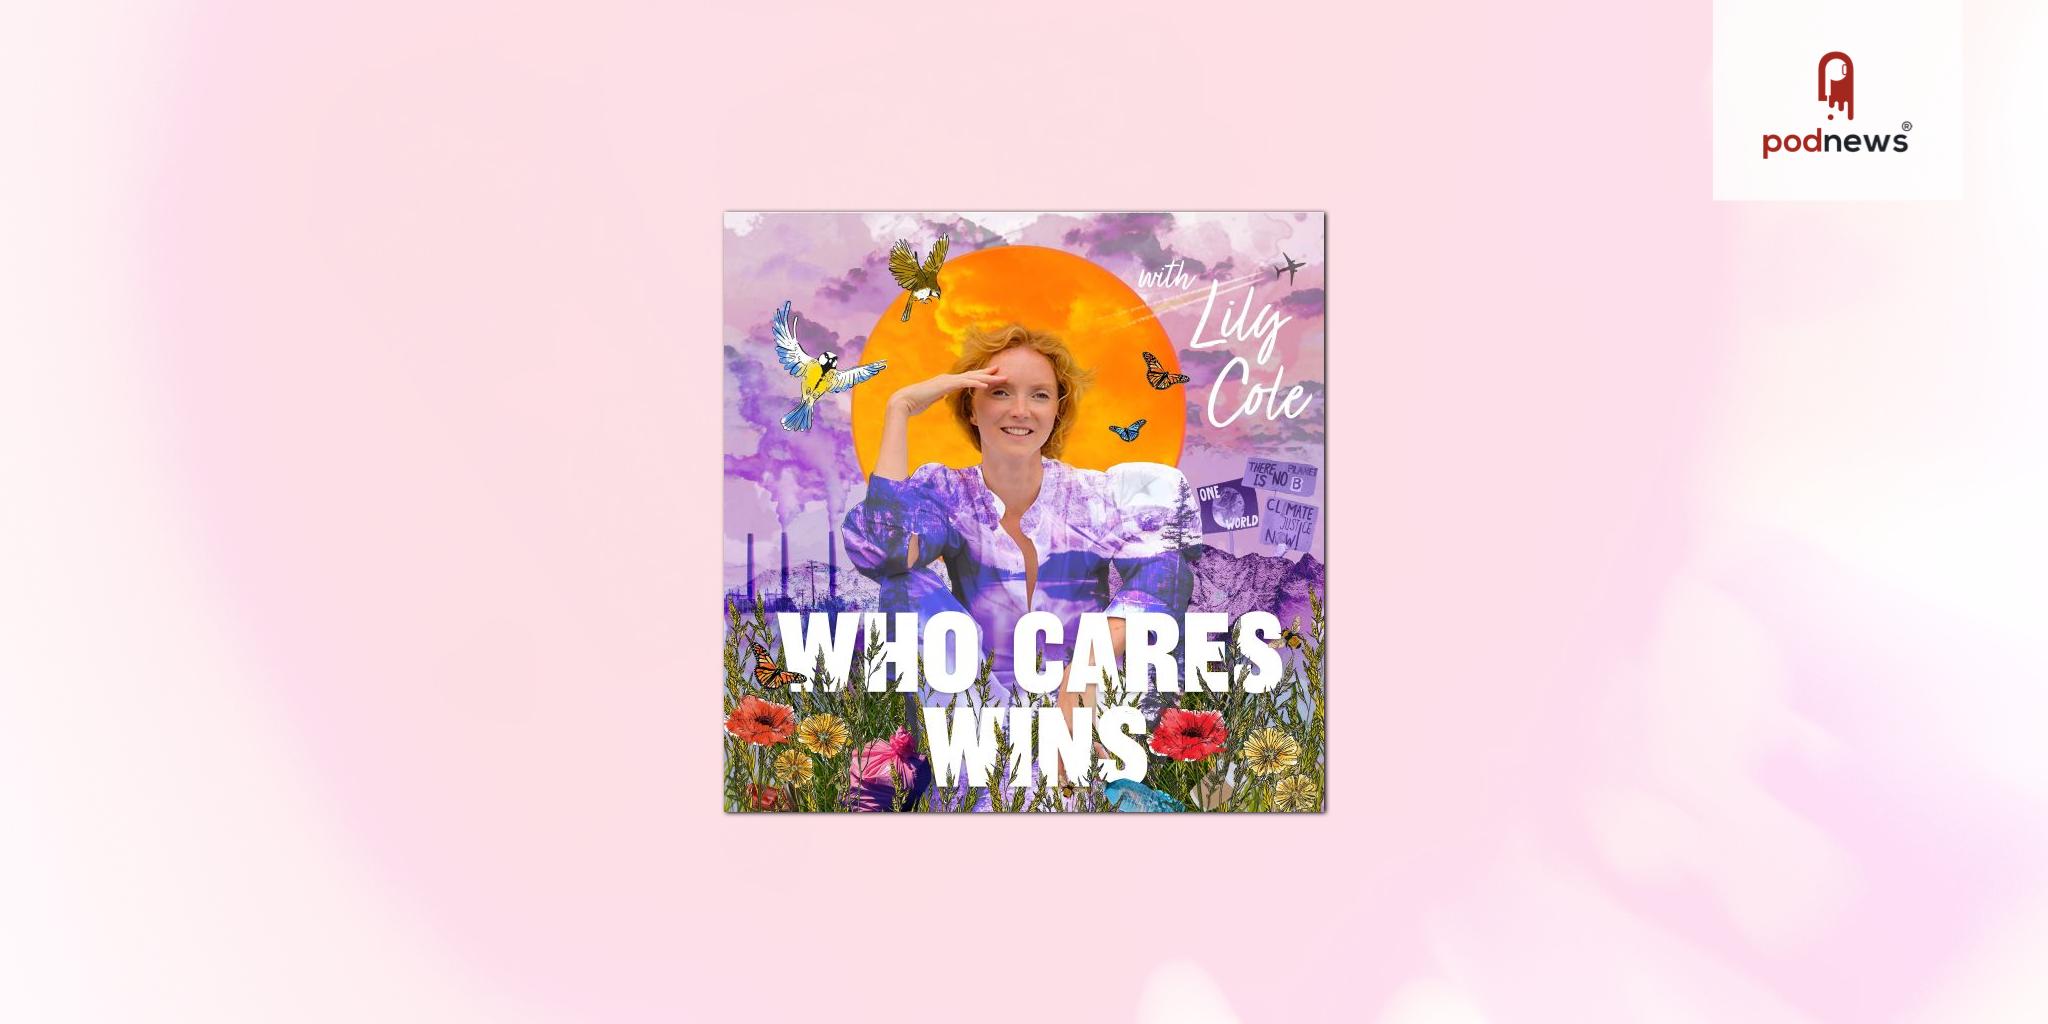 Model and activist Lily Cole launches the second series of ‘Who Cares Wins’ podcast